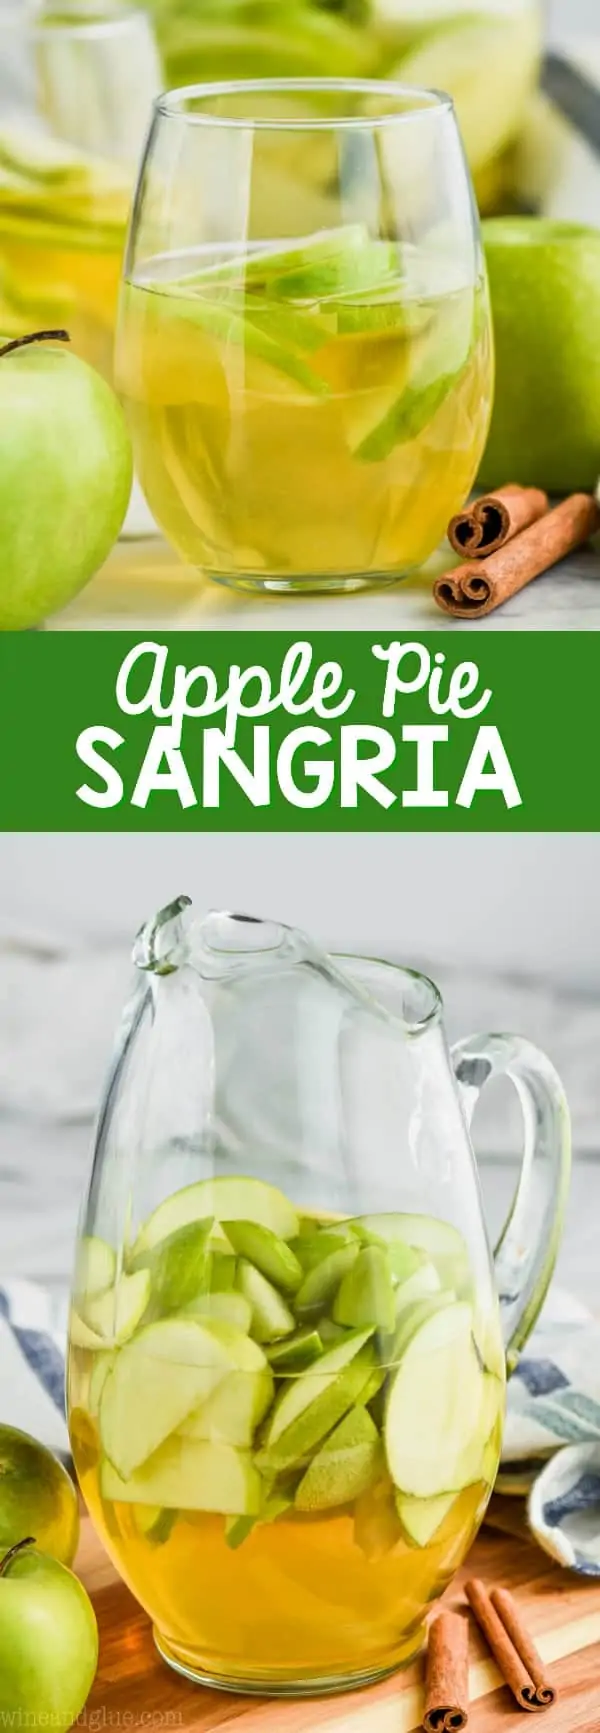 pitcher of apple pie sangria recipe with cut up green apples